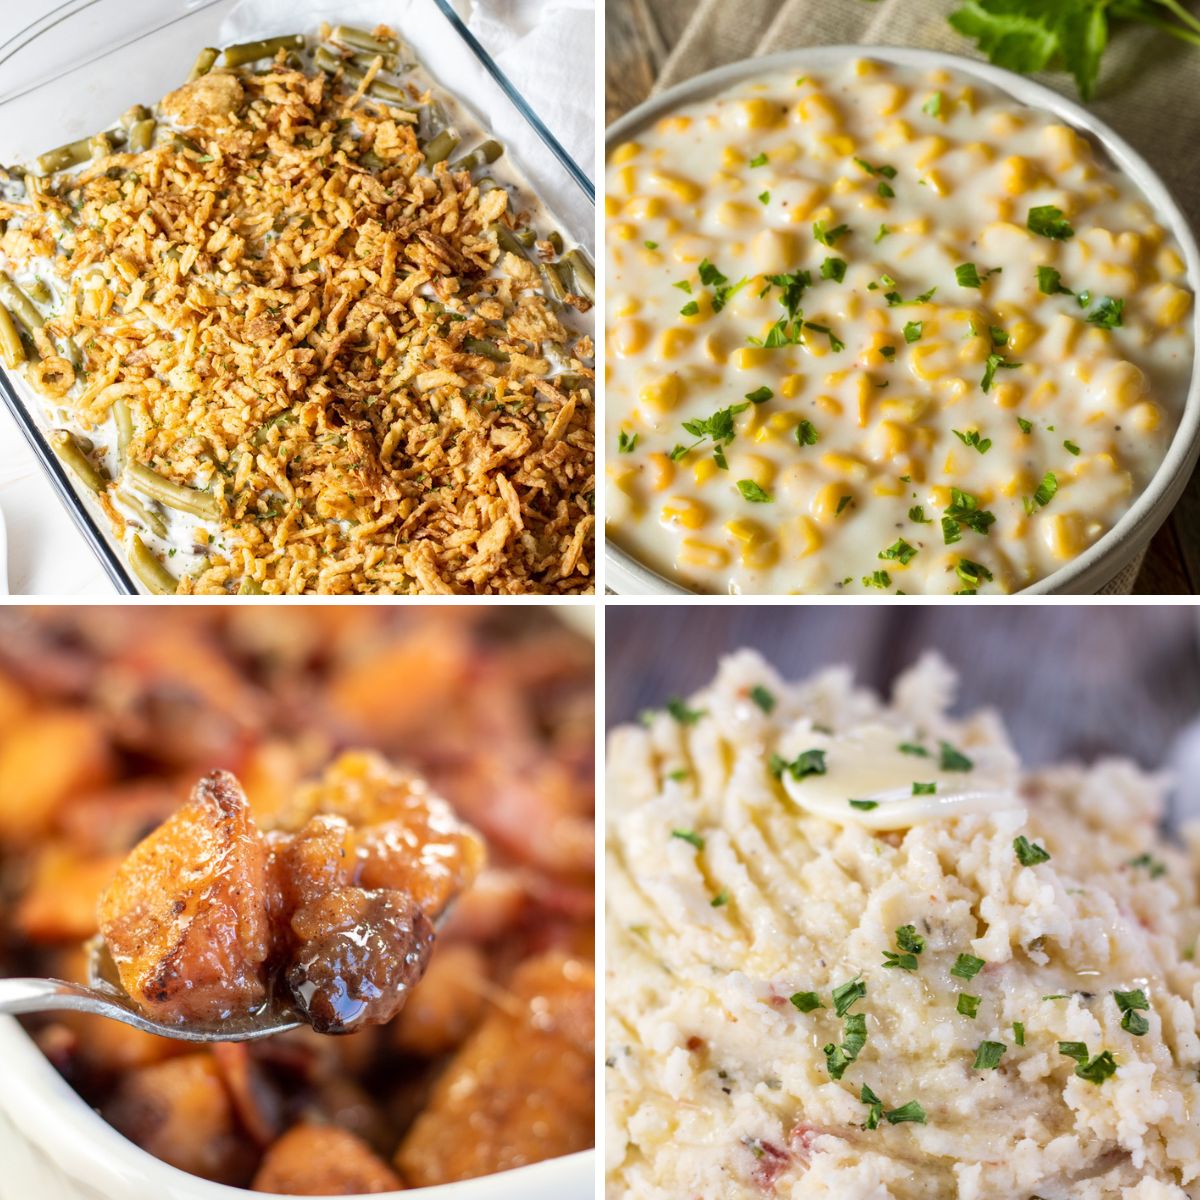 Best 30 minute Christmas side dishes to make for the holidays this year, featuring 4 tasty recipes in a square collage.